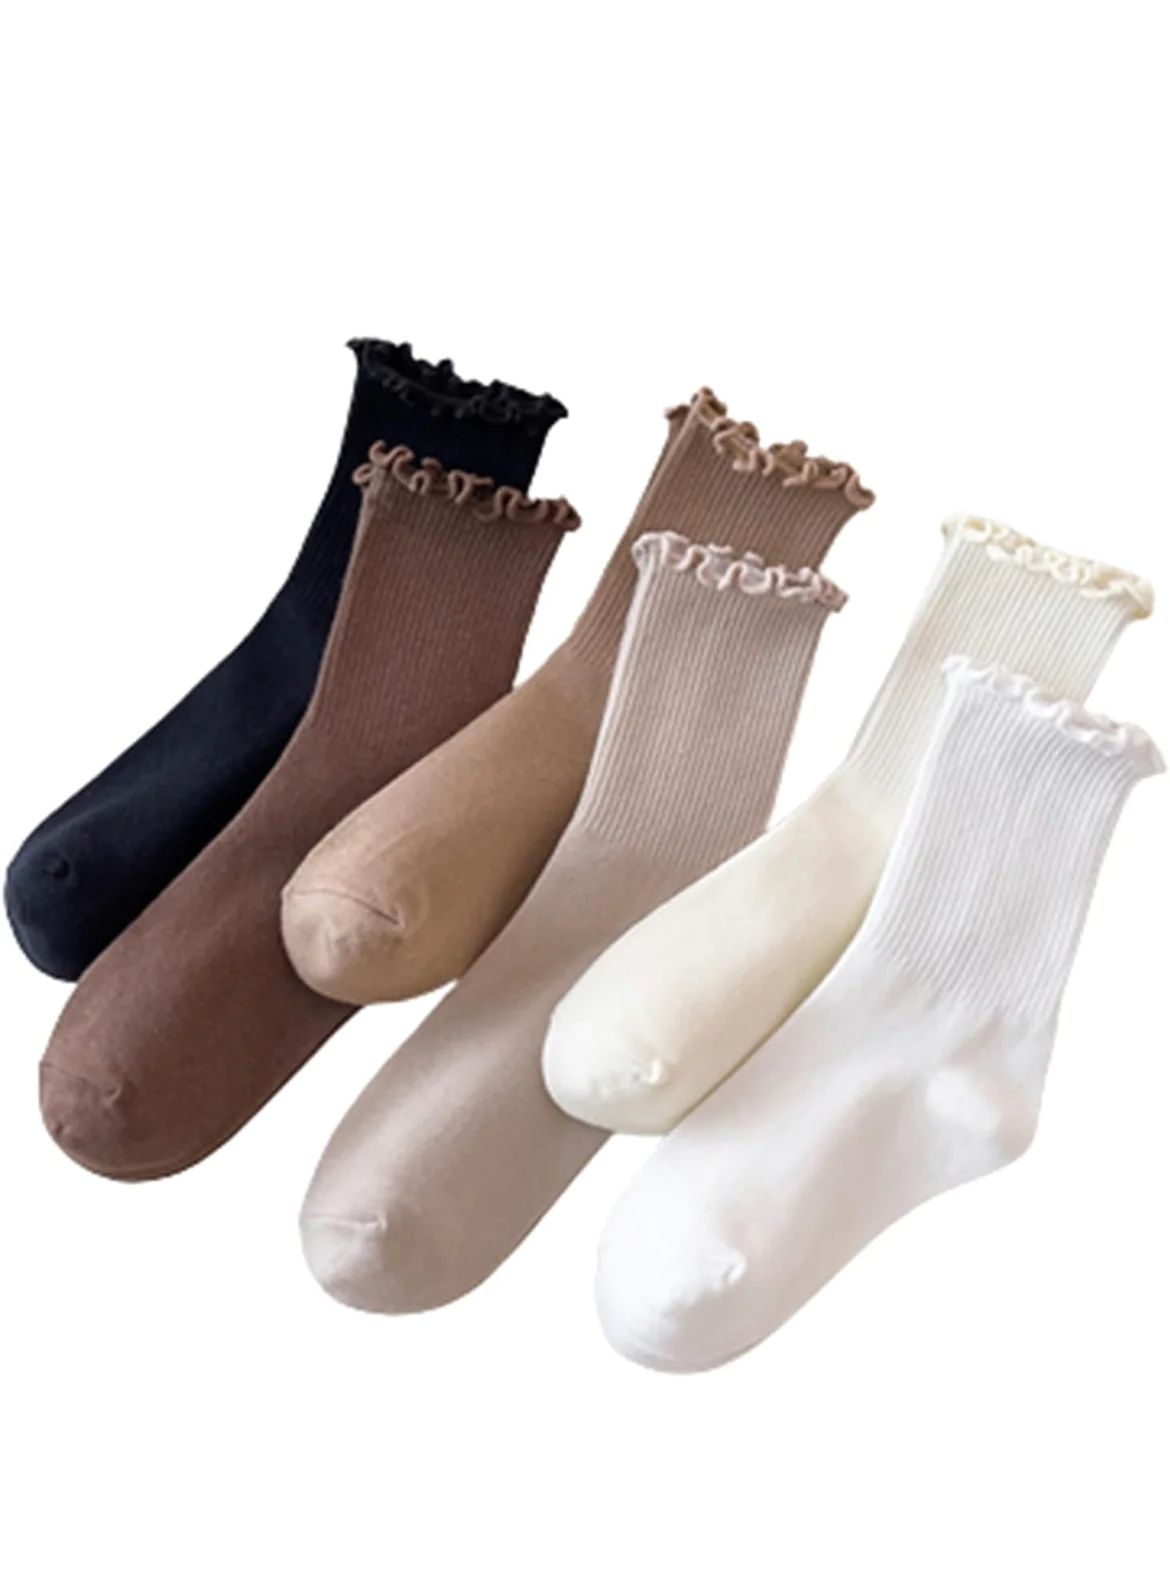 Peeping Over The Boots Socks (6 Colors) | The Boxed Bowtique